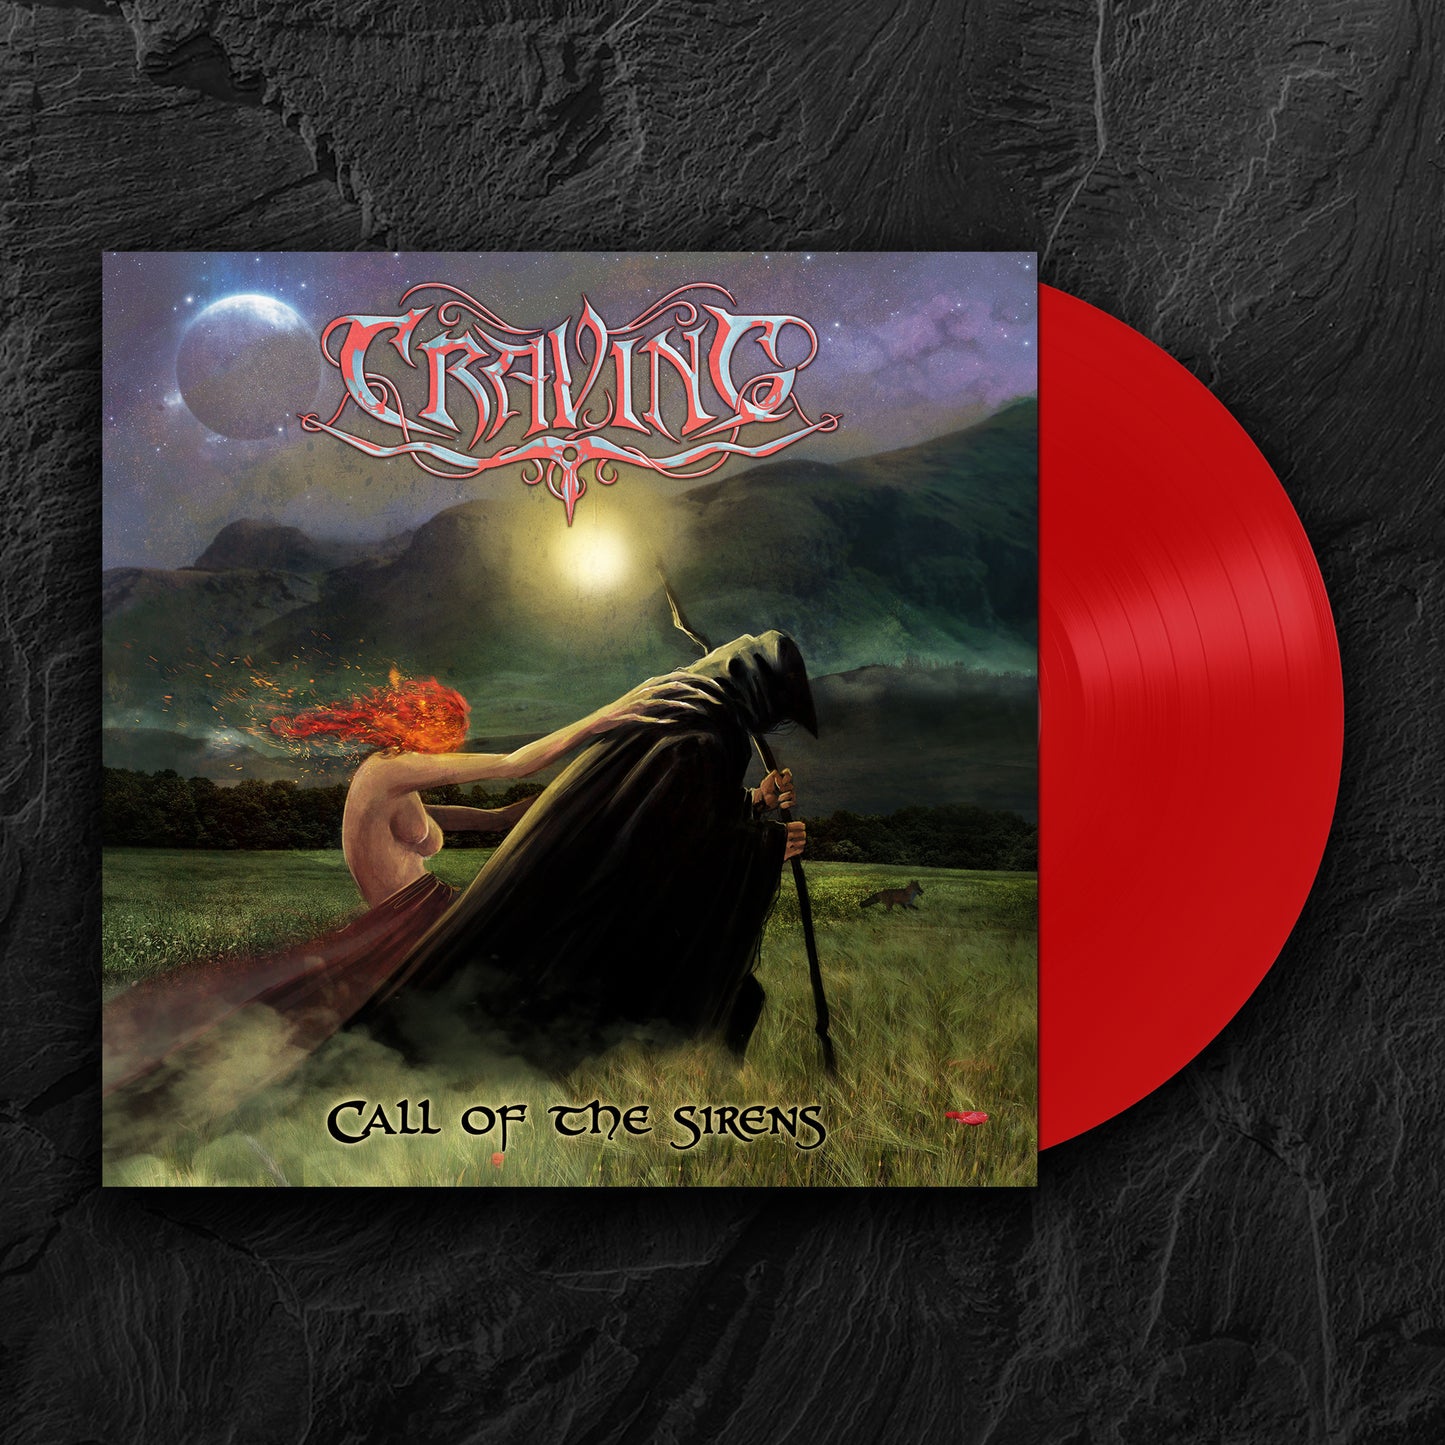 CALL OF THE SIRENS - RED VINYL